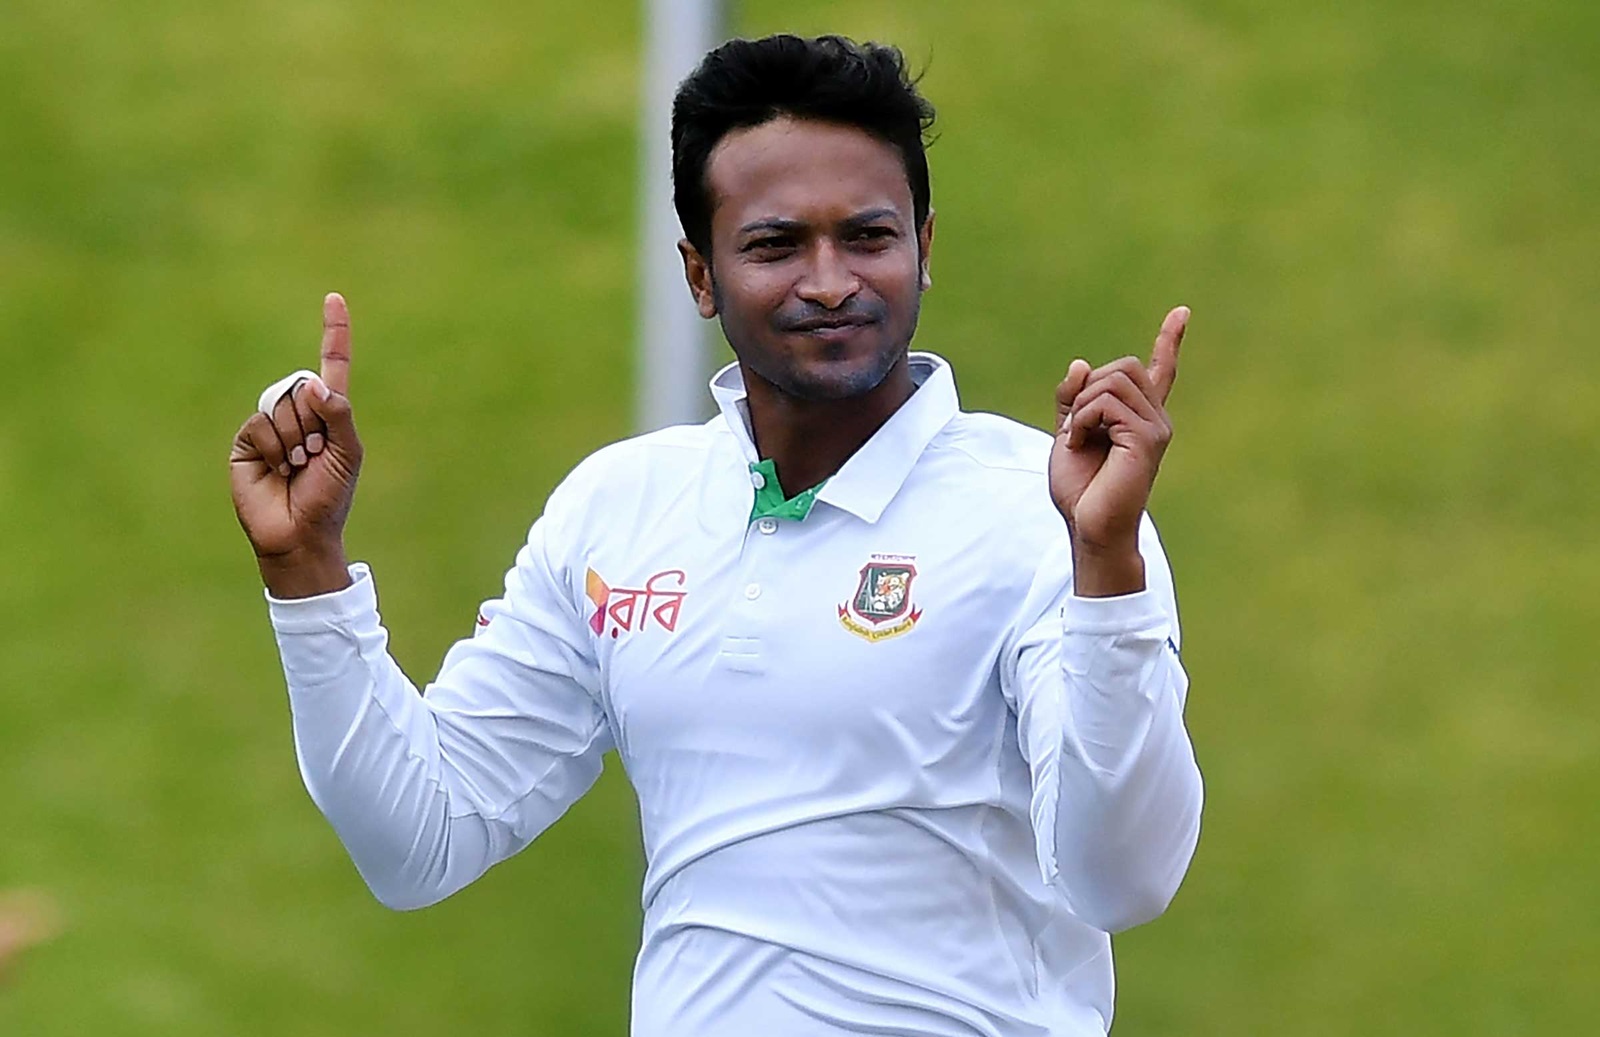 All-Rounder Shakib Al Hasan Ruled Out Of First Test vs Pakistan Due To Hamstring Injury